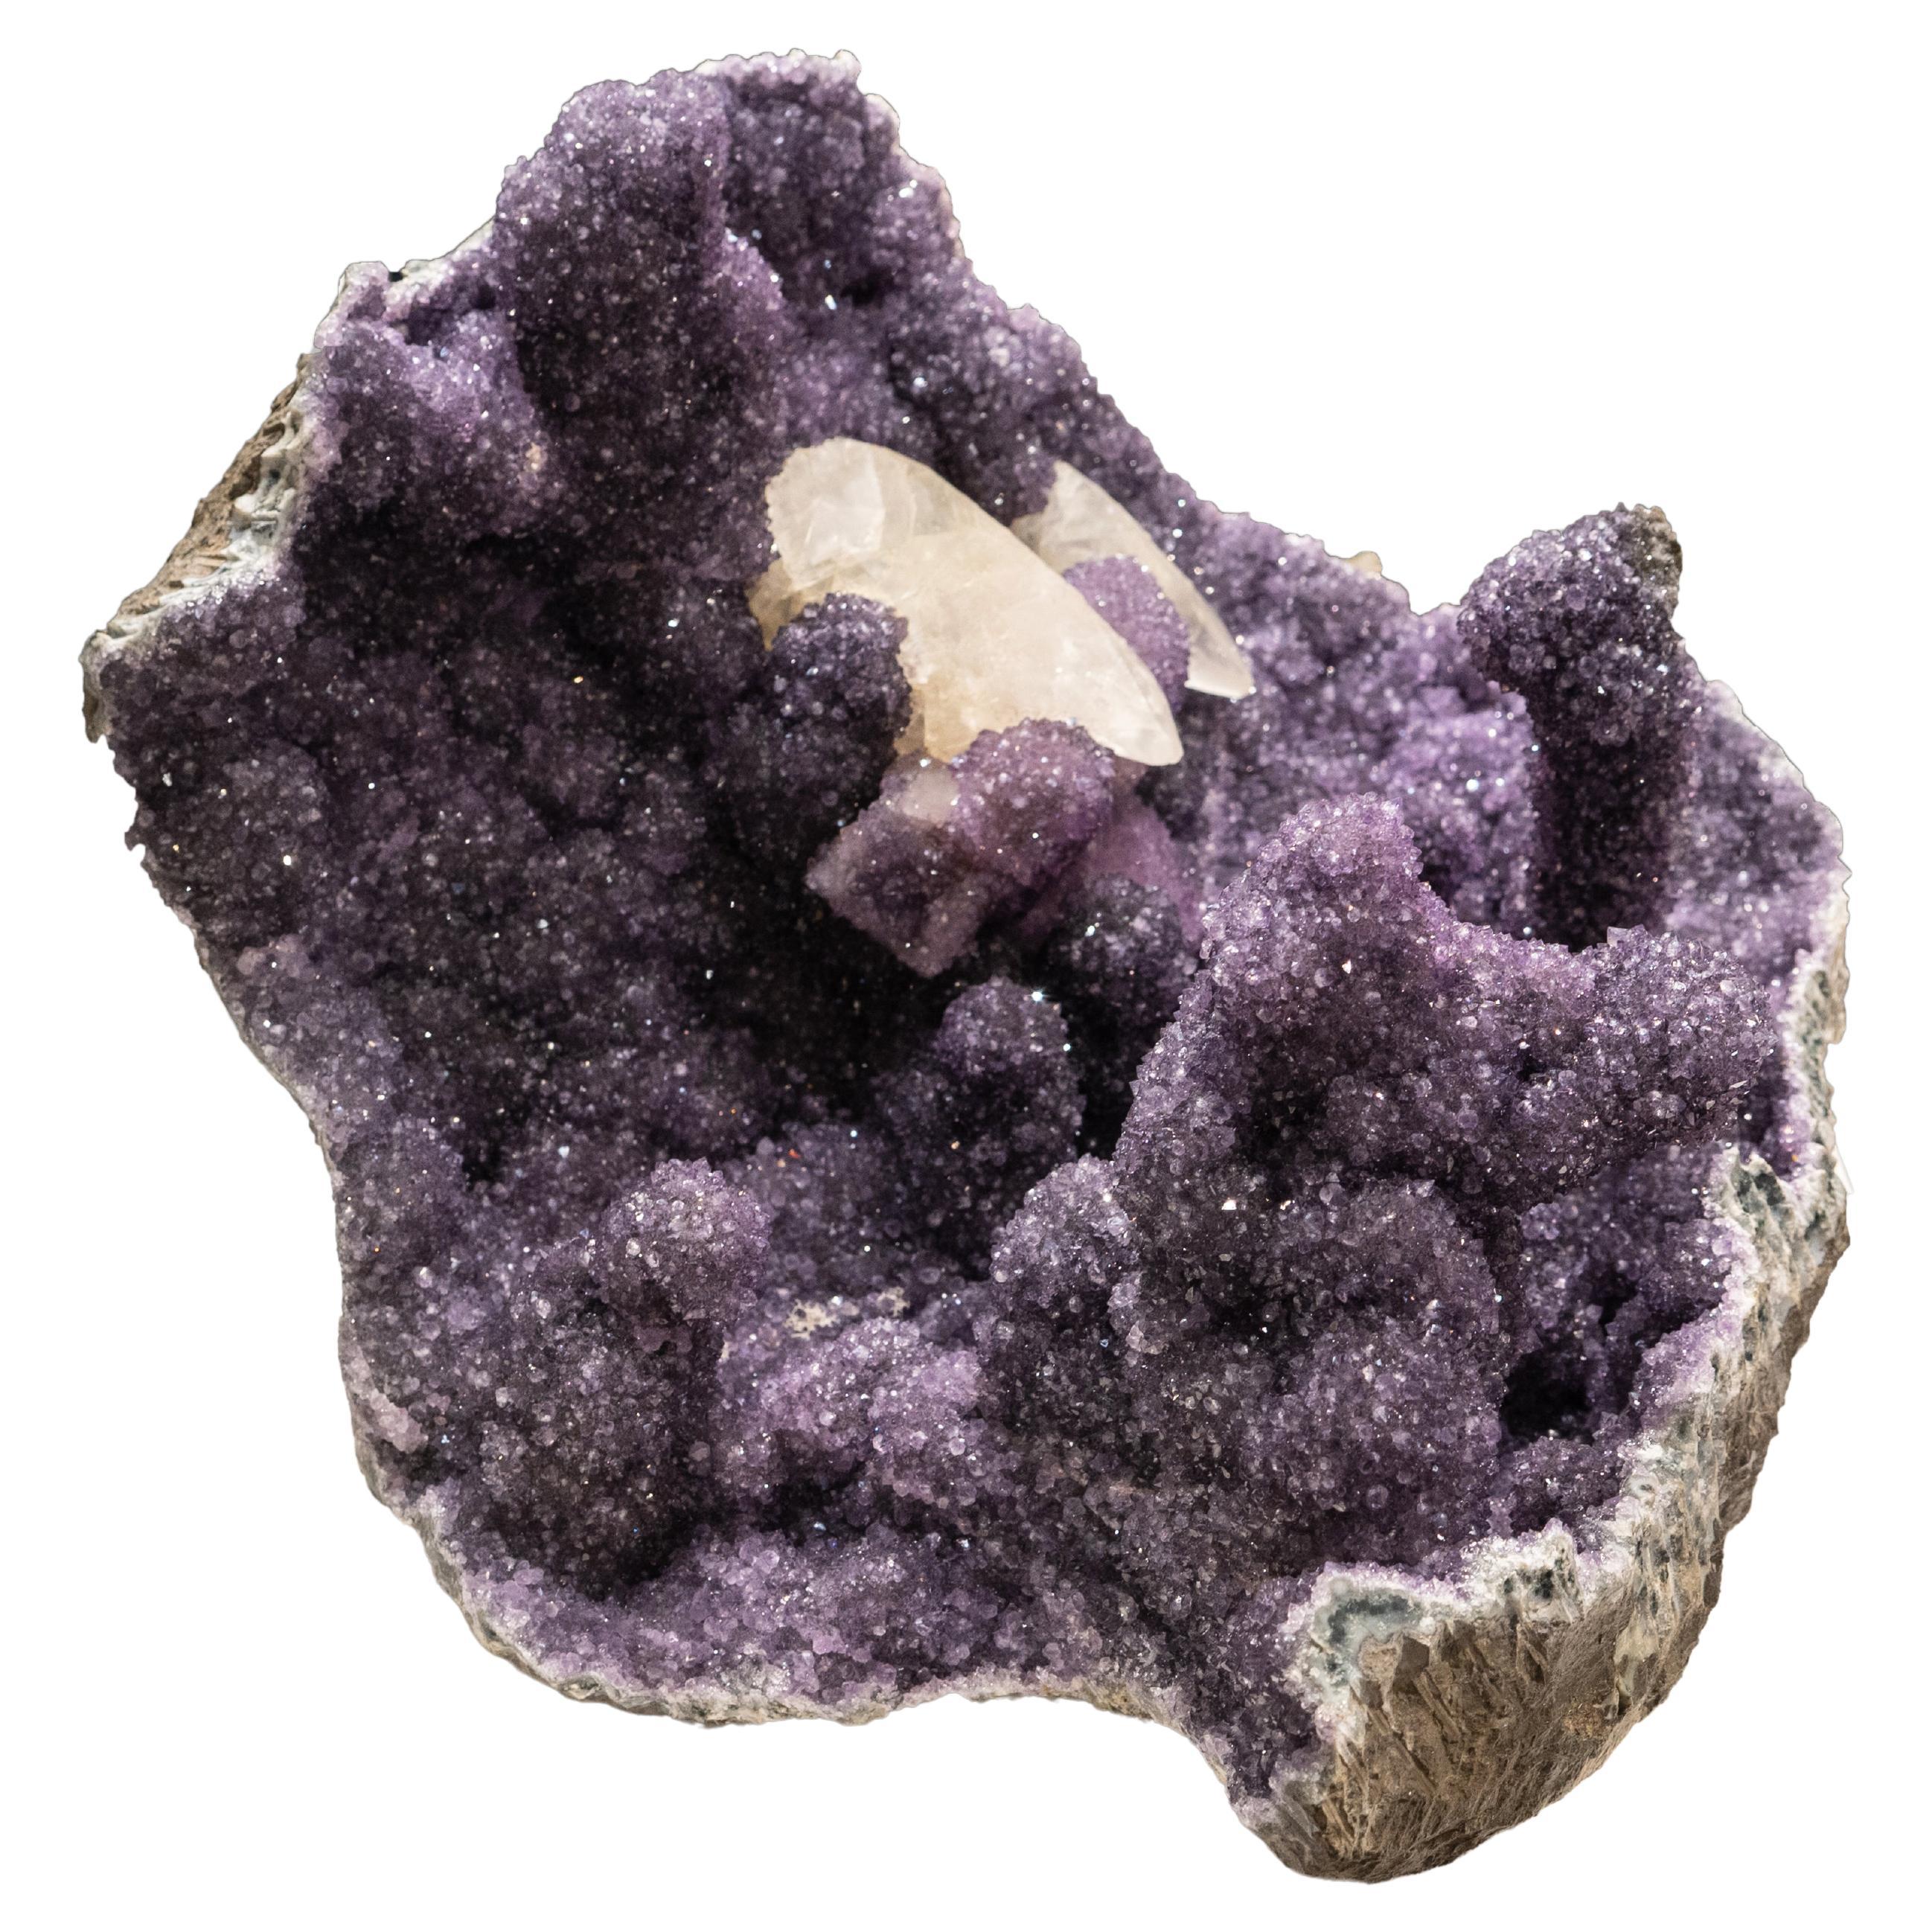 This specimen from San Eugenio, Artigas Dept., Uruguay is a large museum quality cluster of several stalactitic formations of scintillating gem amethyst crystals with 2 isolated golden calcite crystals in sharp scalenohedral from with gem